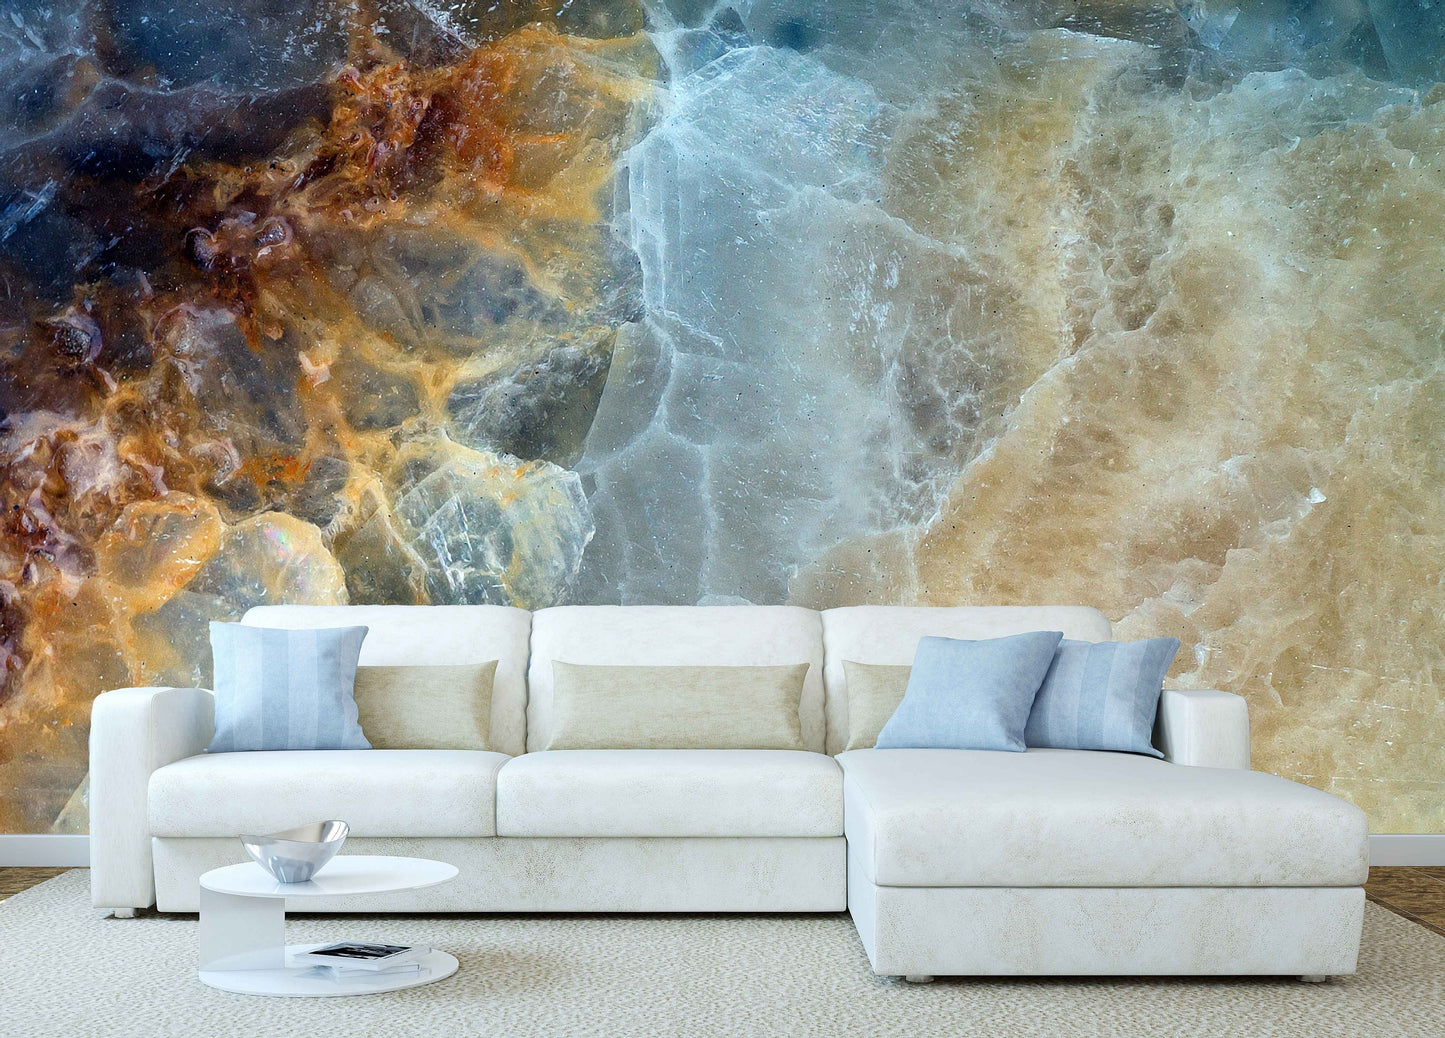 Marble wallpaper peel and stick Marble mural Adhesive wall murals Wall prints Home wall decor Art deco wallpaper